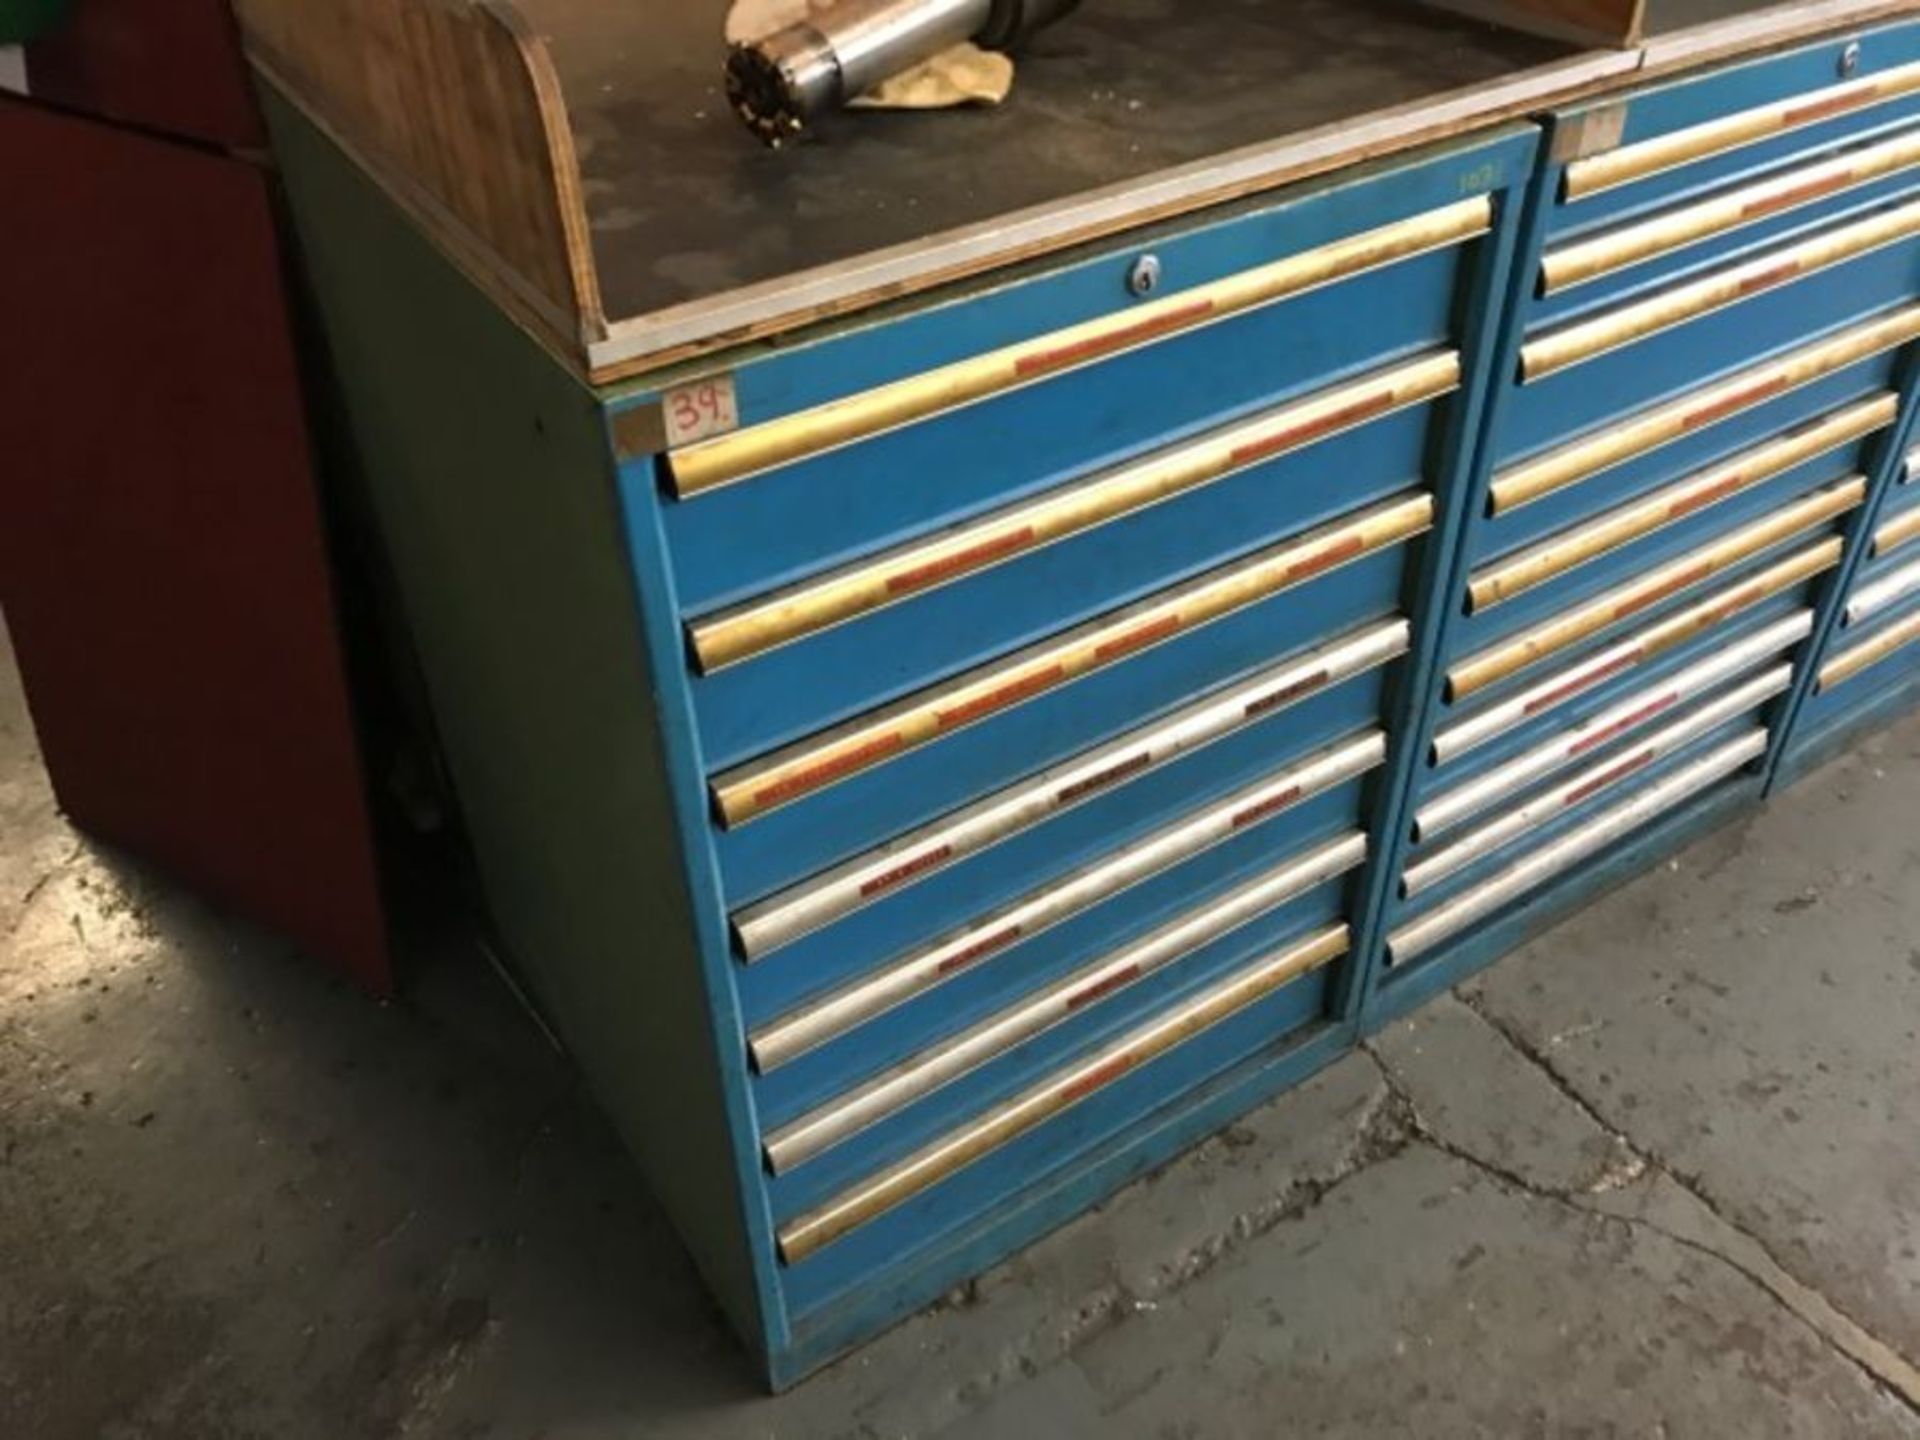 6 Polstore tool cabinets - Image 5 of 7